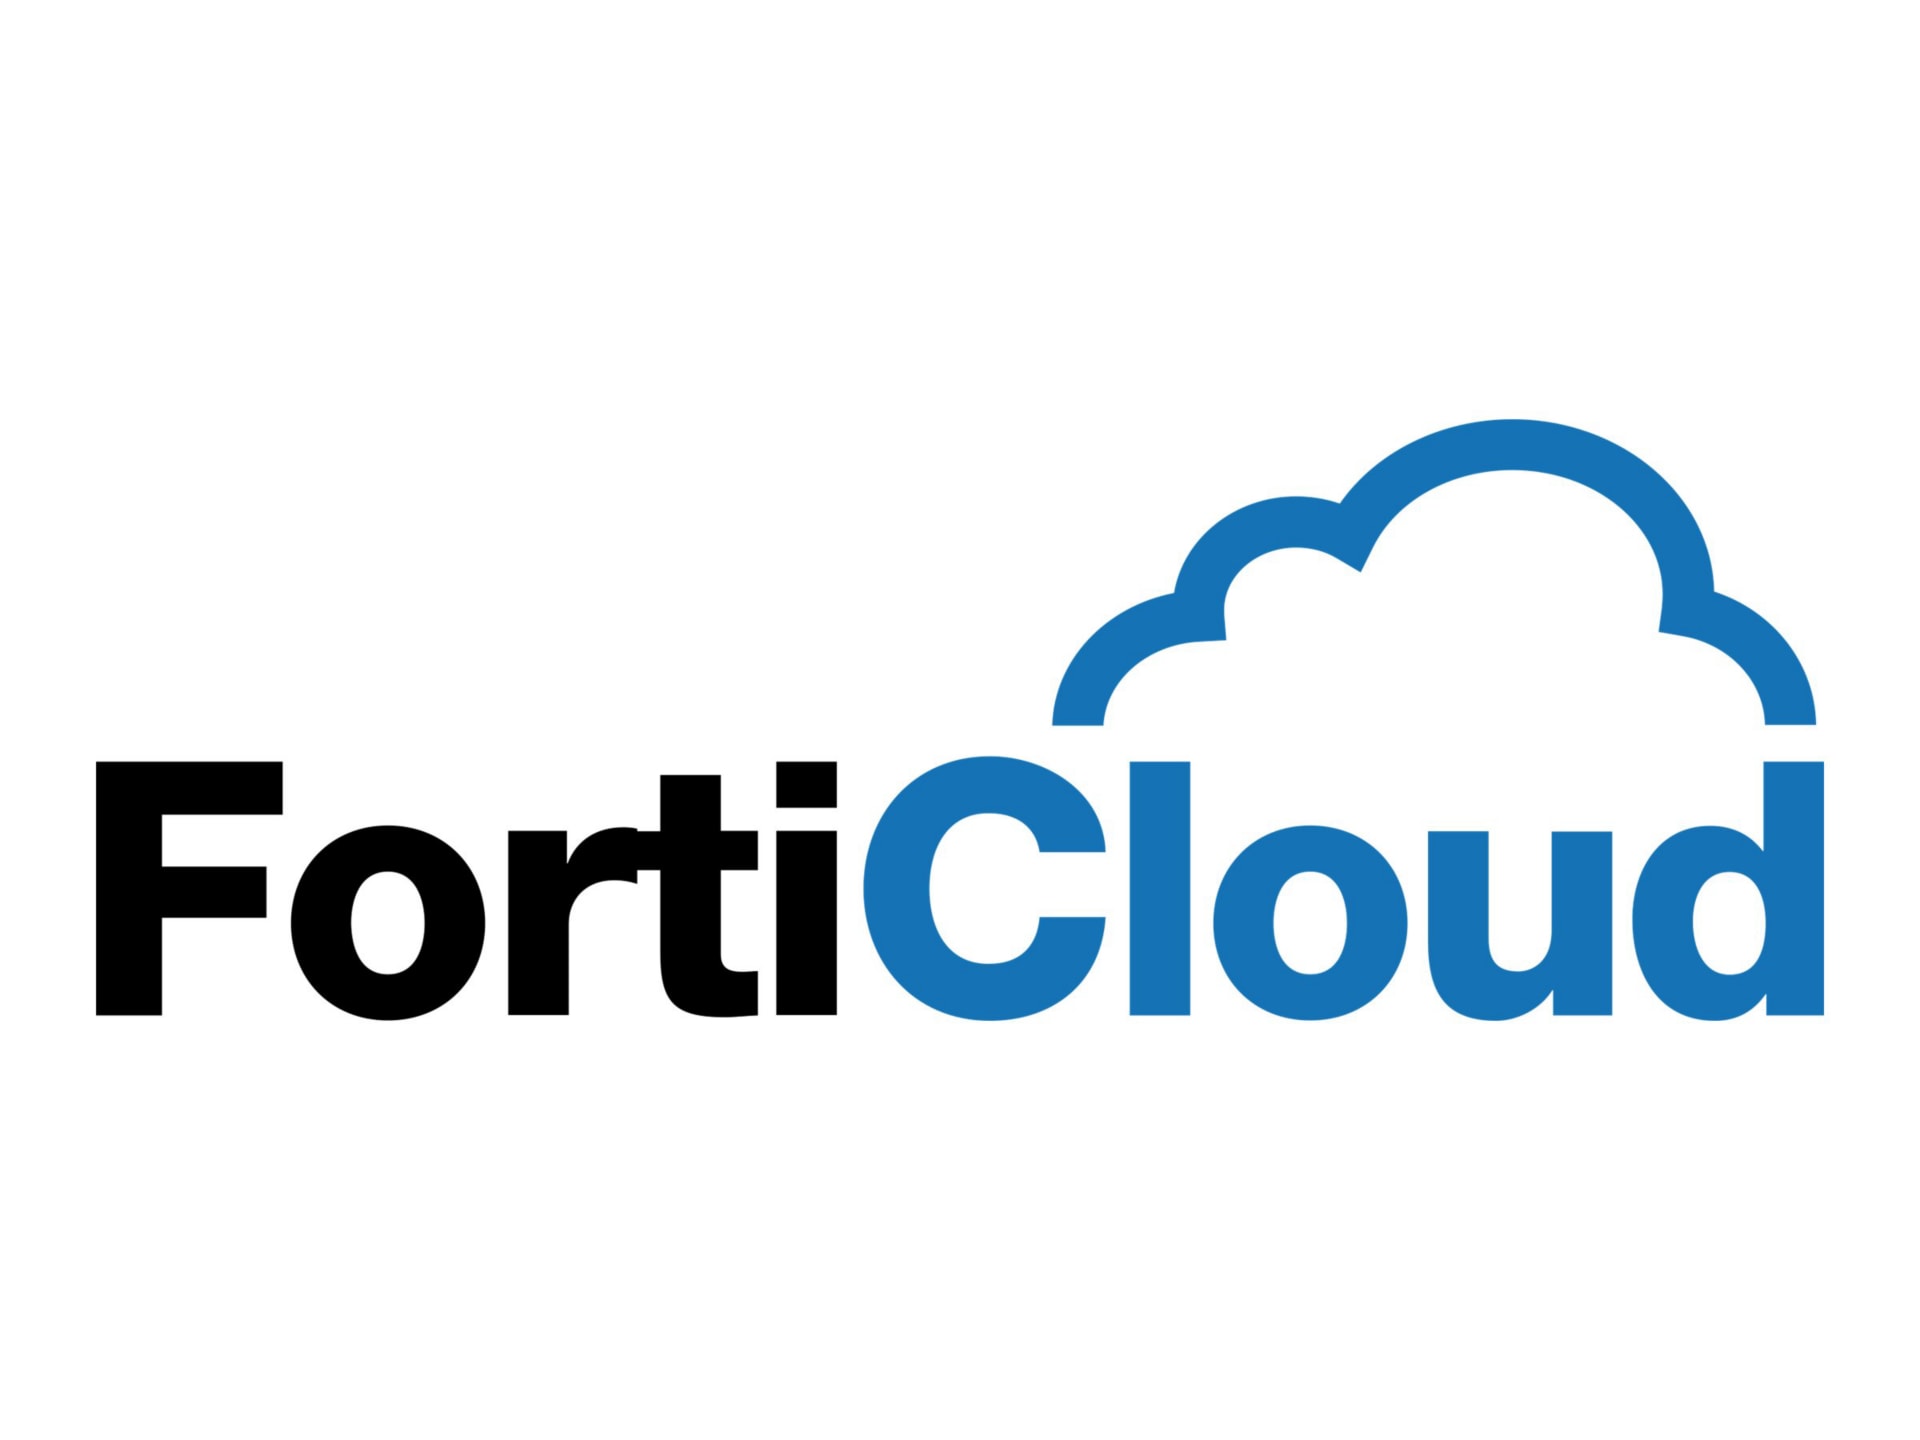 FortiToken Cloud - time-based subscription (1 year) + FortiCare 24x7 - up to 100 users, 10000 SMS messages